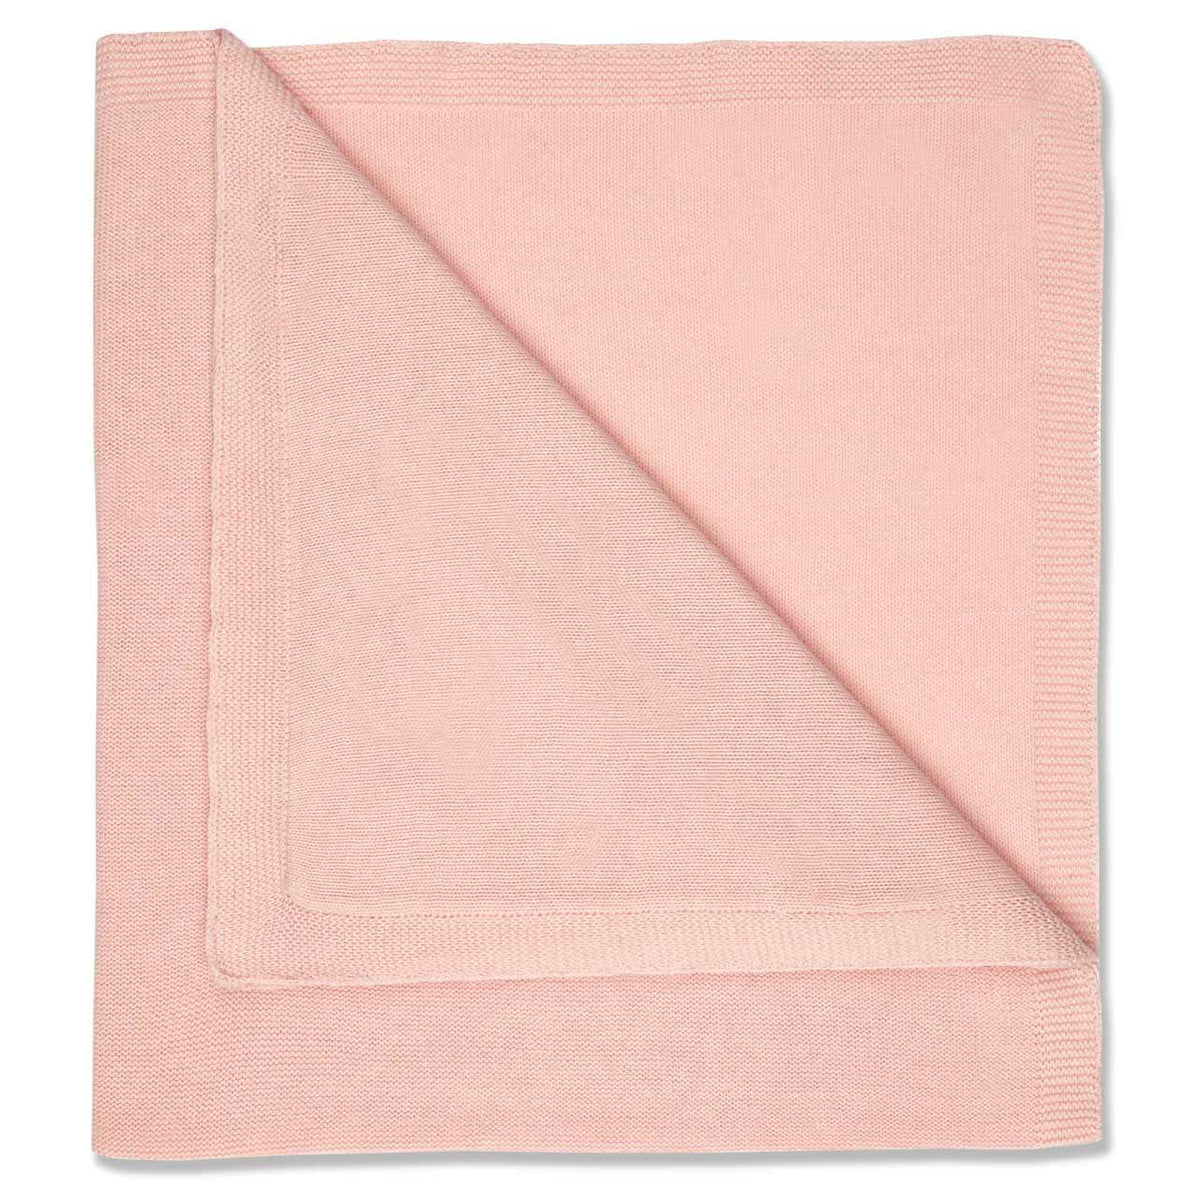 Knitted Blanket in Pale Pink